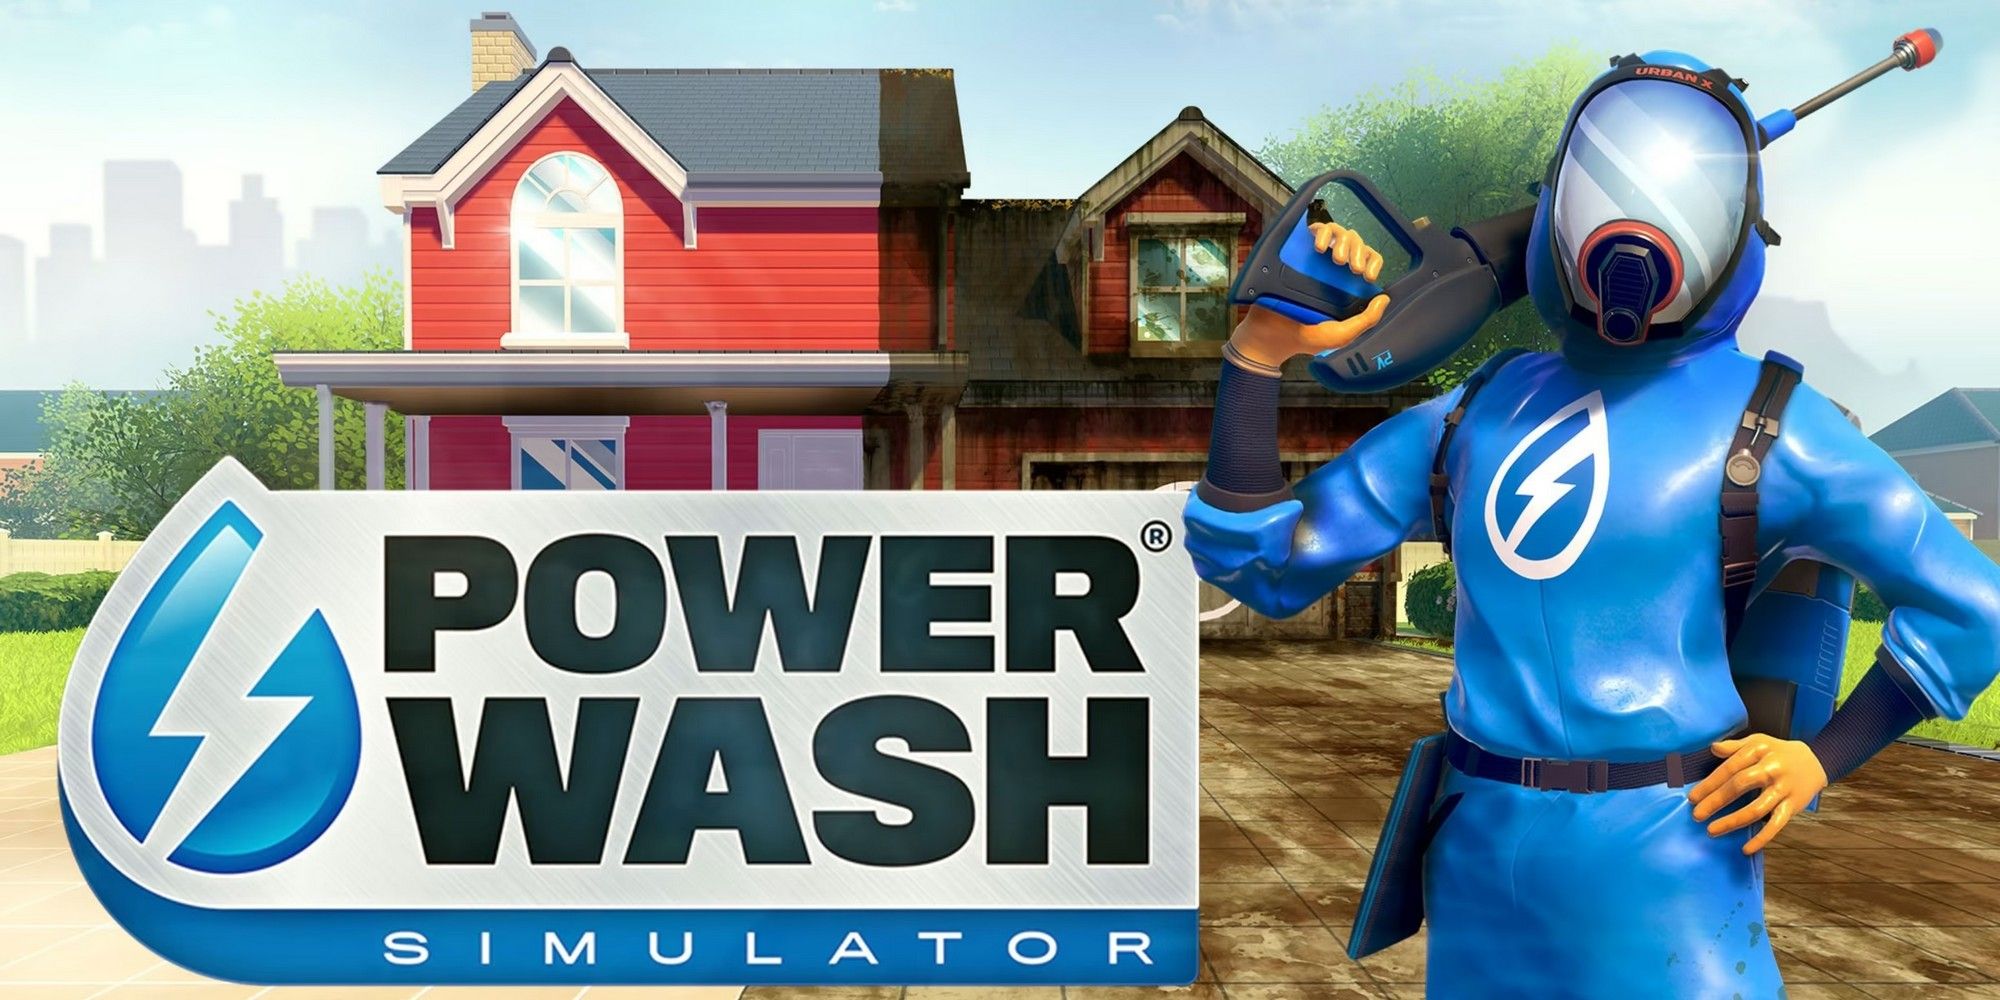 PowerWash Simulator is an upcoming game about wiping out grime - Polygon